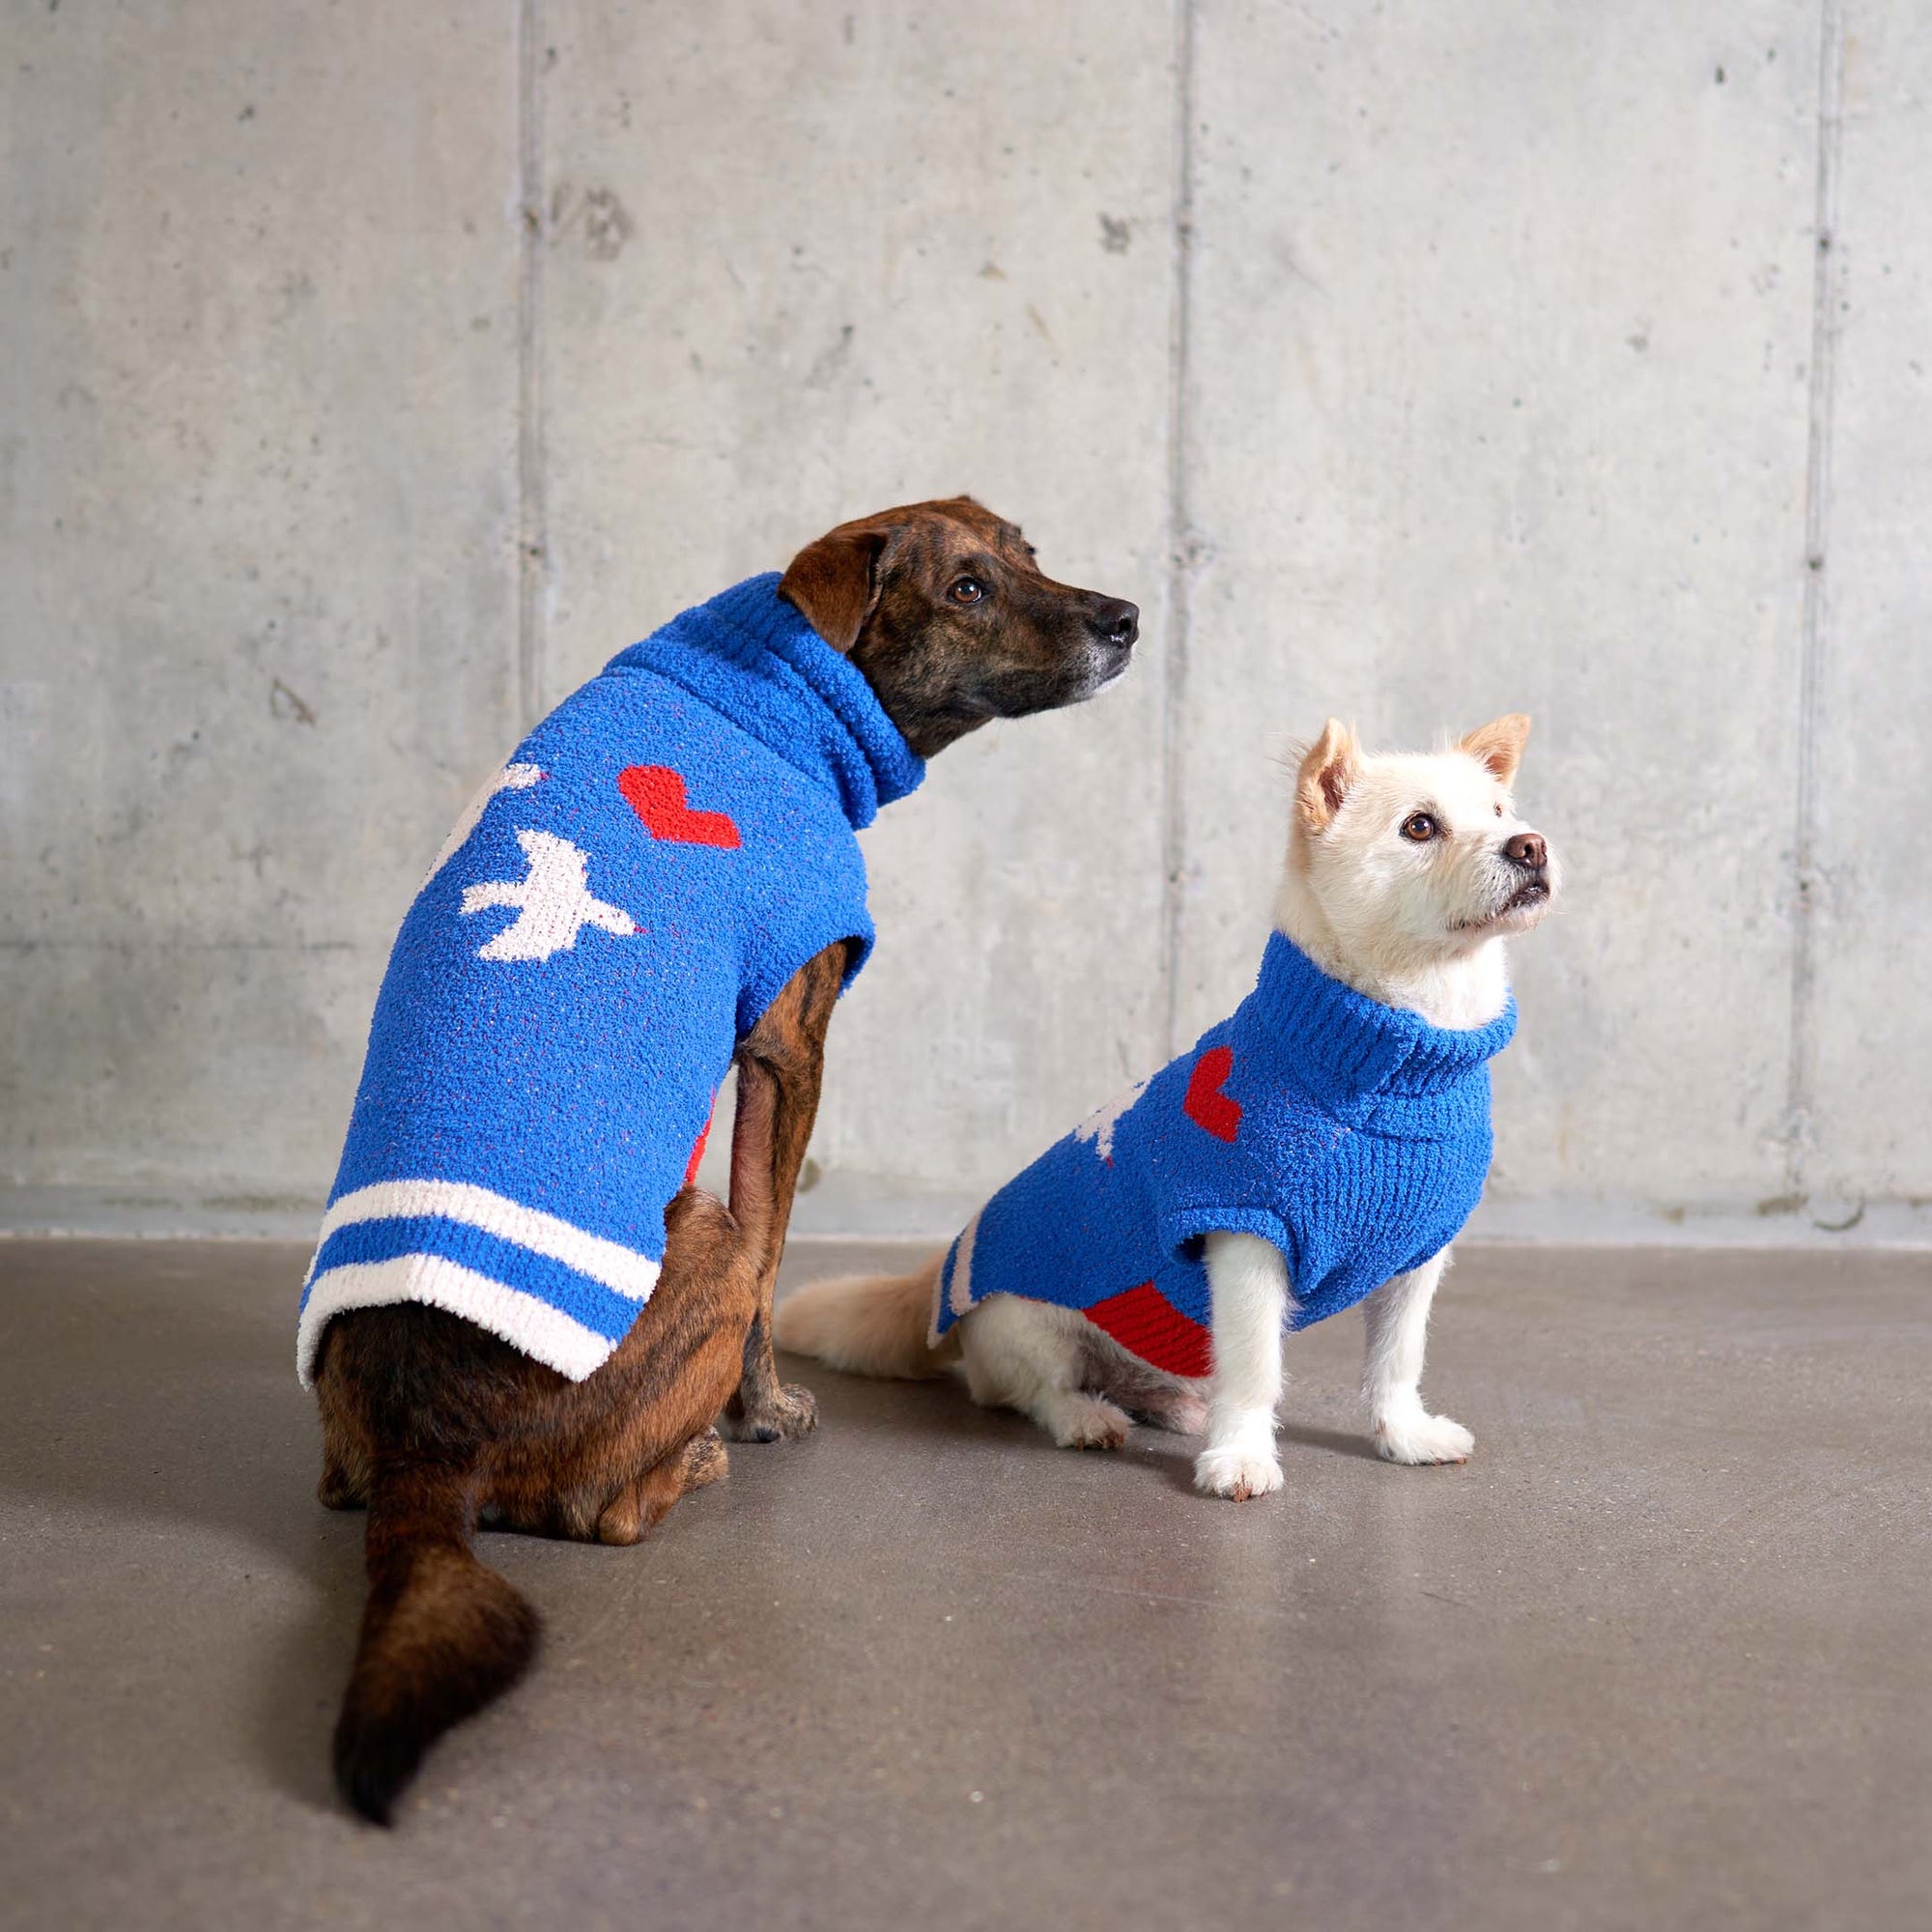  Two dogs, one brindle and one white, wearing matching blue "The Furryfolks" love bird sweaters, against a concrete backdrop.